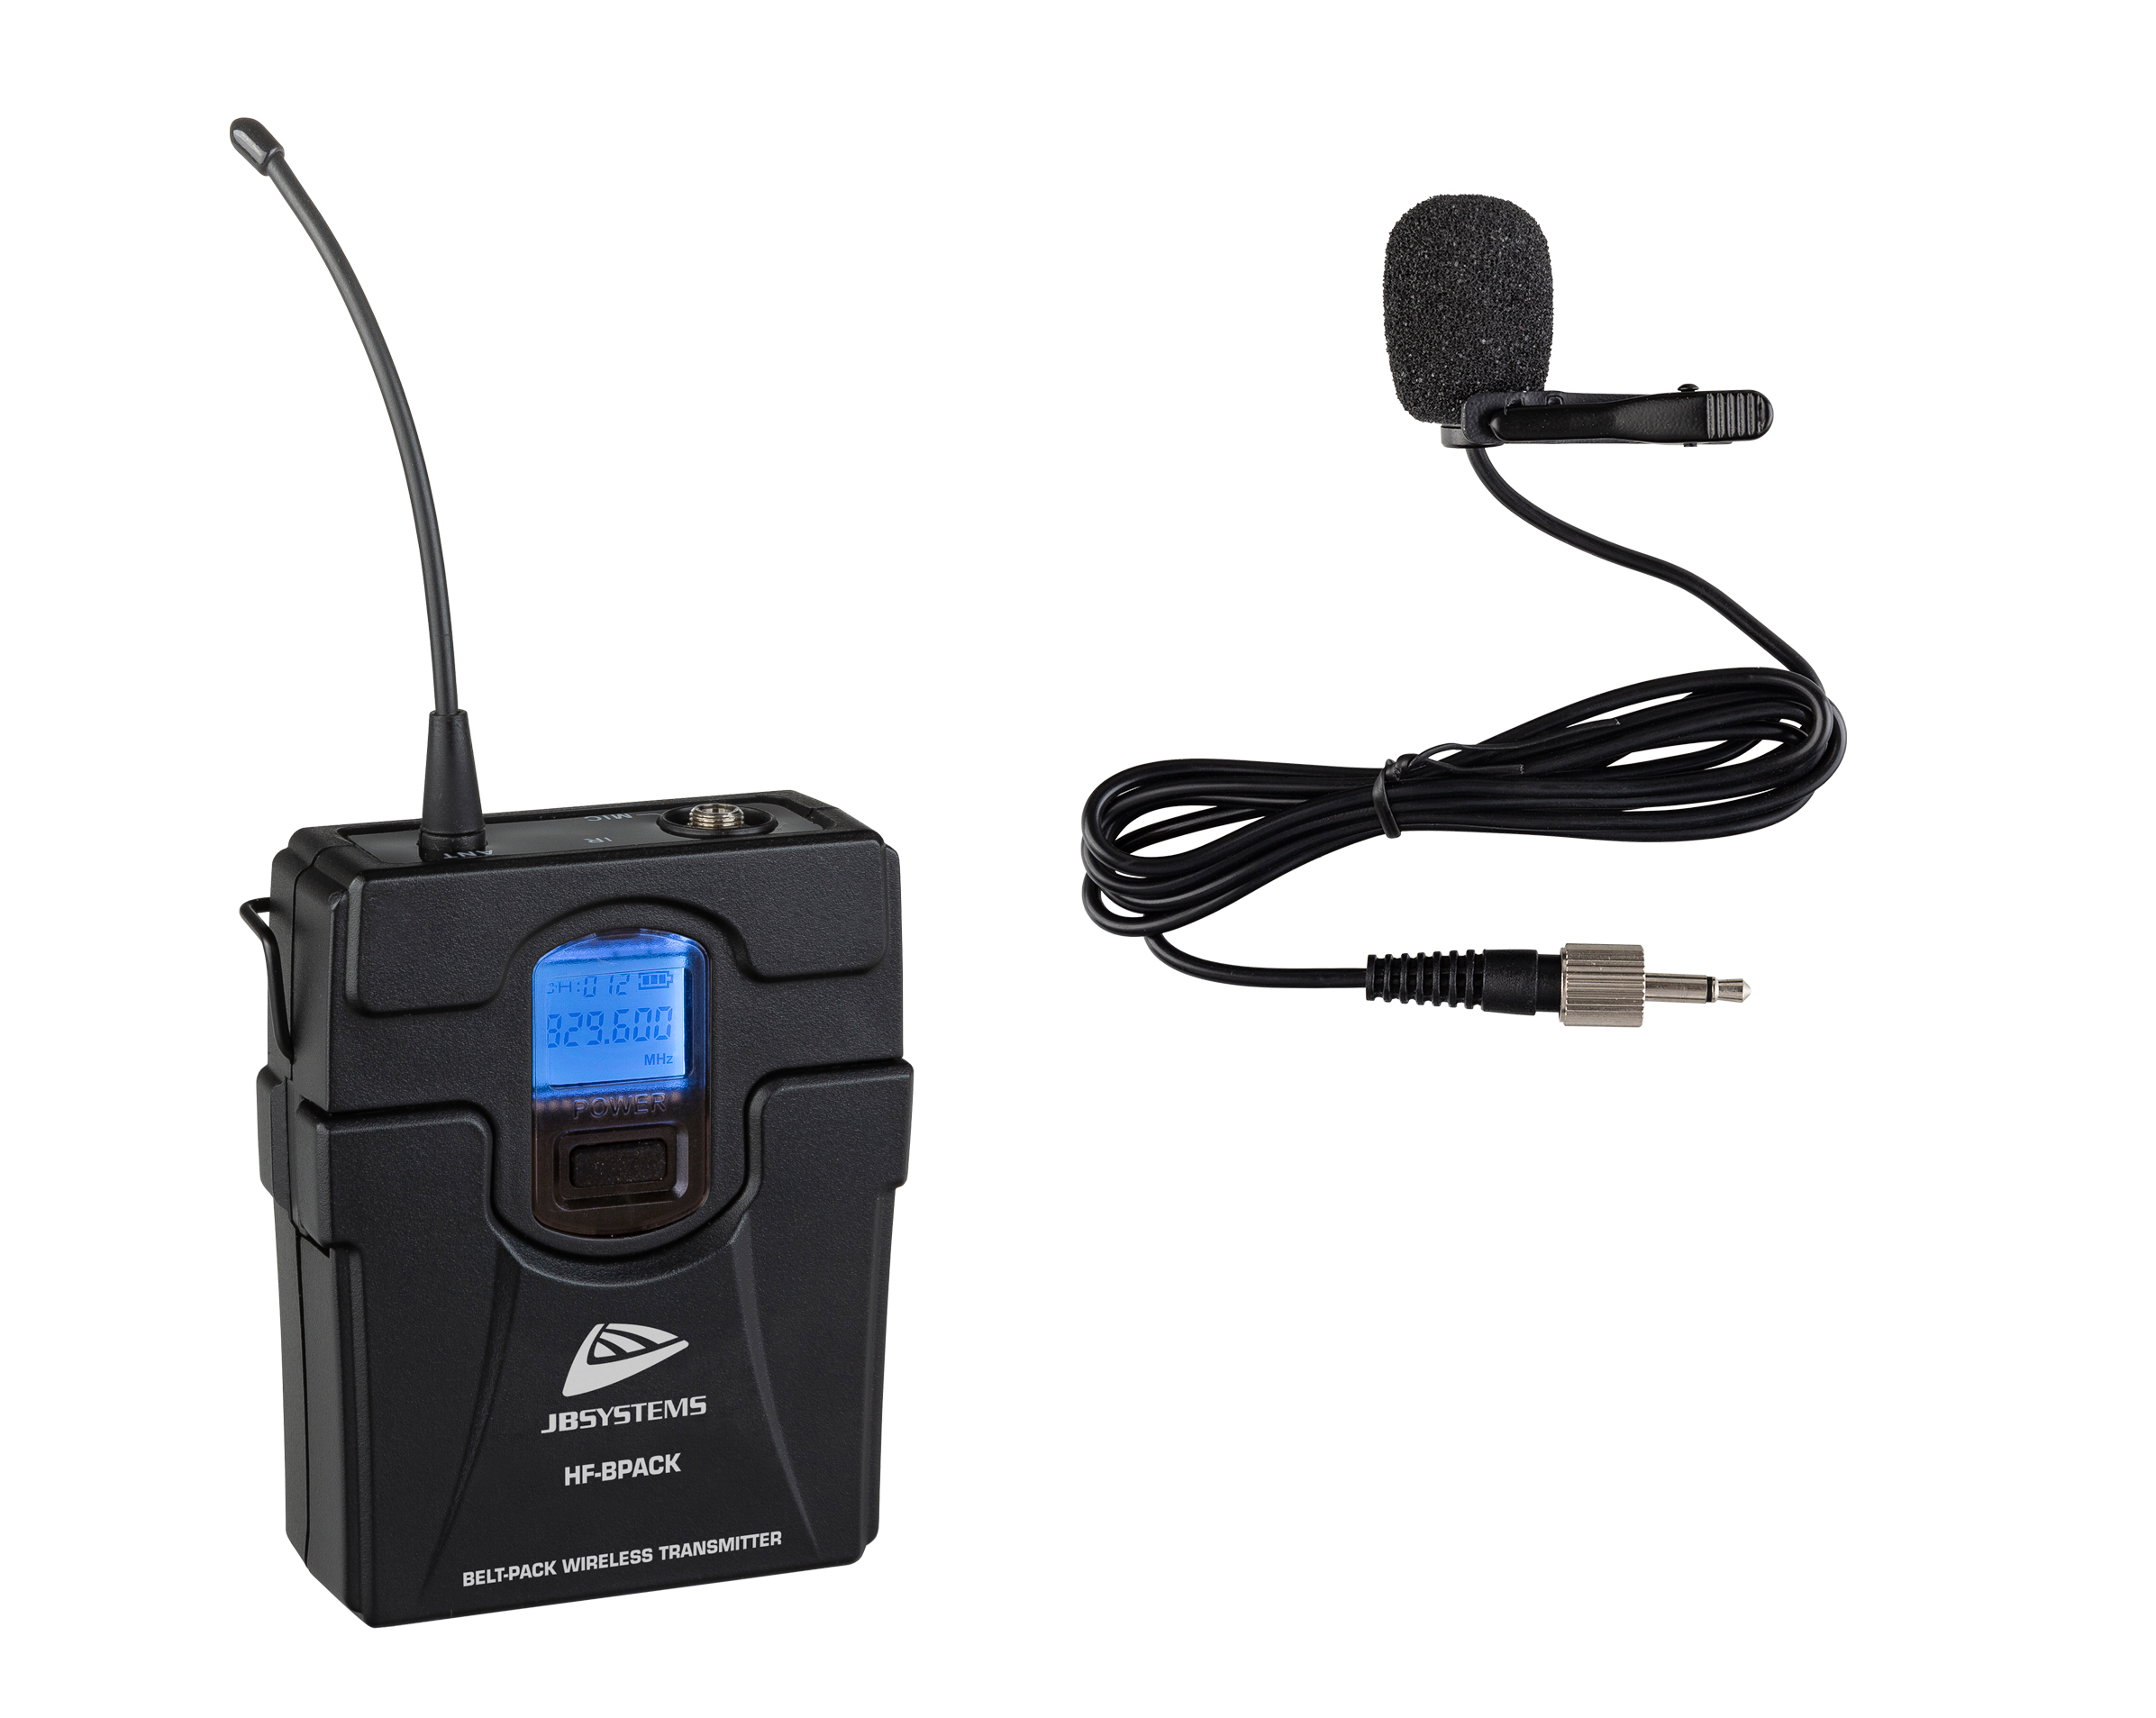 Belt-pack and lavalier microphone for use with the HF-TWIN RECEIVER